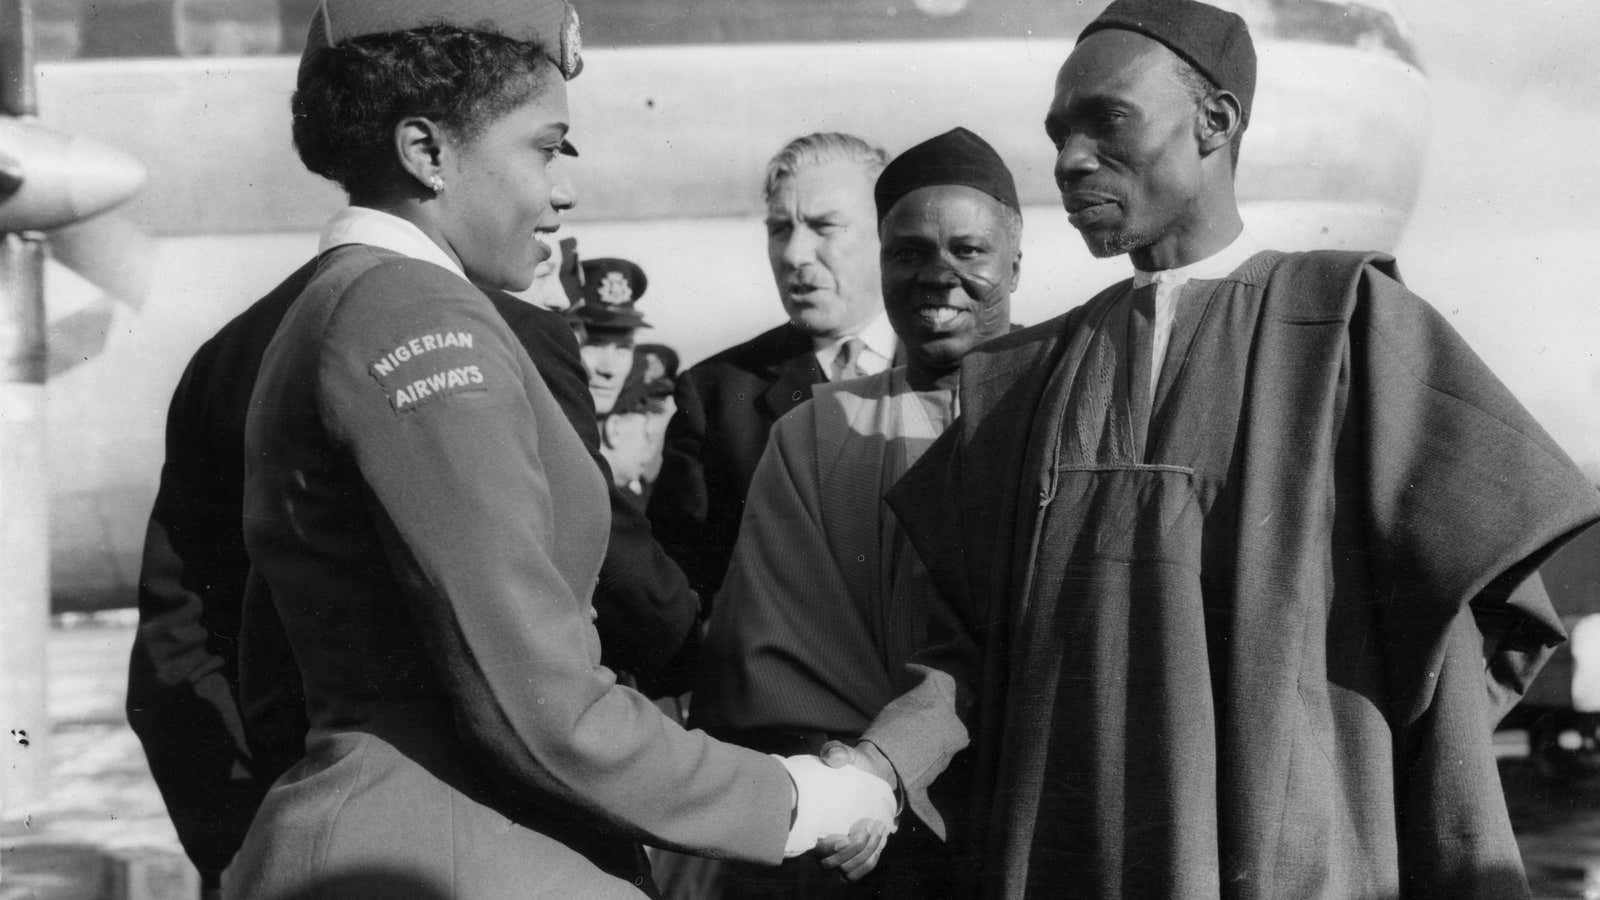 The first Nigerian prime minister, Abubakar Tafawa Balewa, greets an air stewardess after the inaugural flight of the WAAC (West African Airline Company) on Oct 1, 1958.